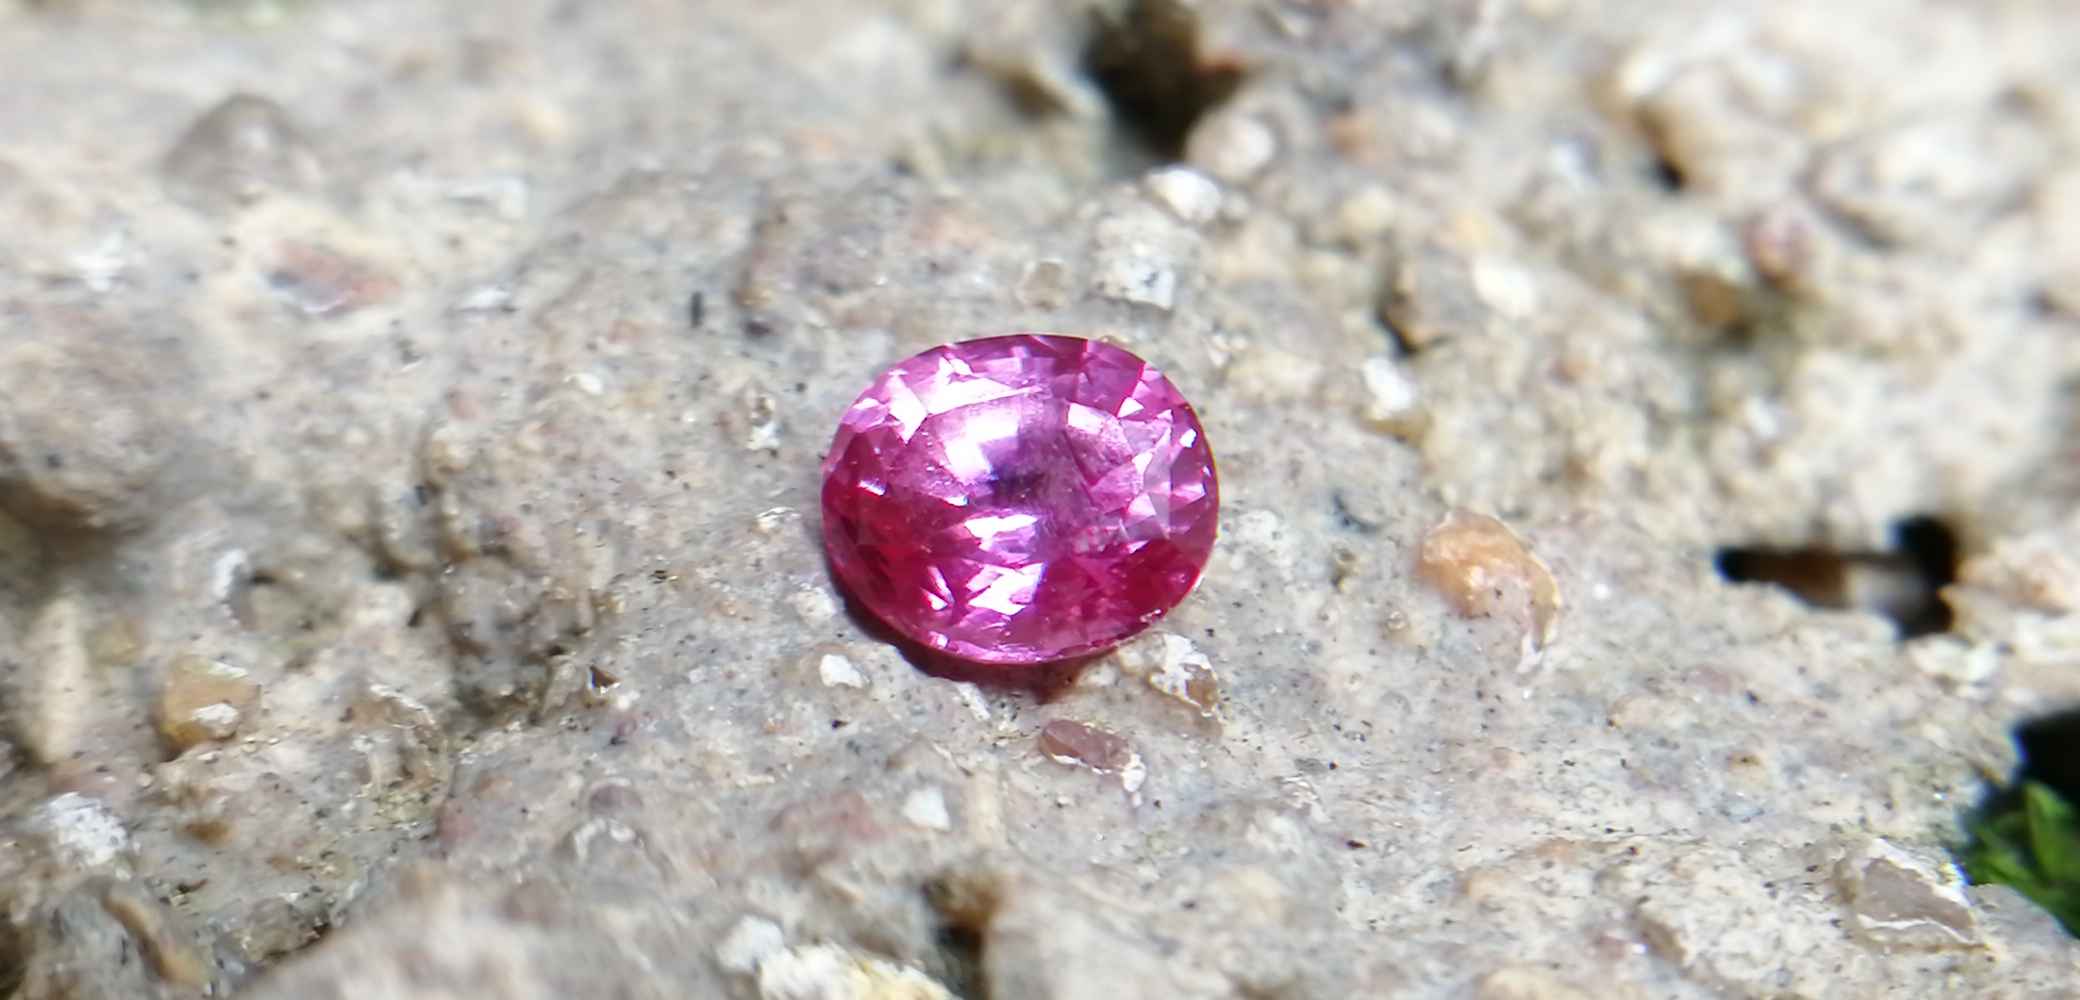 Ceylon Natural Light Pink Sapphire 粉紅的藍寶石 Sapphire is a precious gemstone, a variety of the mineral corundum, consisting of aluminium oxide with trace amounts of elements such as iron, titanium, chromium, copper, or magnesium. Sapphire helps the user stay on the Spiritual Path, boosting psychic and spiritual powers, and is a great stone for Earth and Chakra healing. Pink Sapphire Healings Pink Sapphire reflects the Light of the heart and love and stimulates the Heart Chakra, located near the center of the breastbone. It is believed that pink sapphires used for therapeutic purposes as crystals might nourish the emotional well-being of the person wearing jewelry crafted from the gems.The theory behind these therapeutic beliefs centers on clearing emotional blockages from the past to release hurtful experiences. Pink Sapphire helps strengthen and balance the heart. It is also useful in balancing blood sugar, glucose metabolism and in cases of diabetes, hypoglycemia and hyperglycemia. • Nourishing the Emotional Body with the PinkColor Ray • Energetic Columns of Support • Longevity and Extending the Lifespan of Your Cells • Astral Vision and Sensitivity to Energy